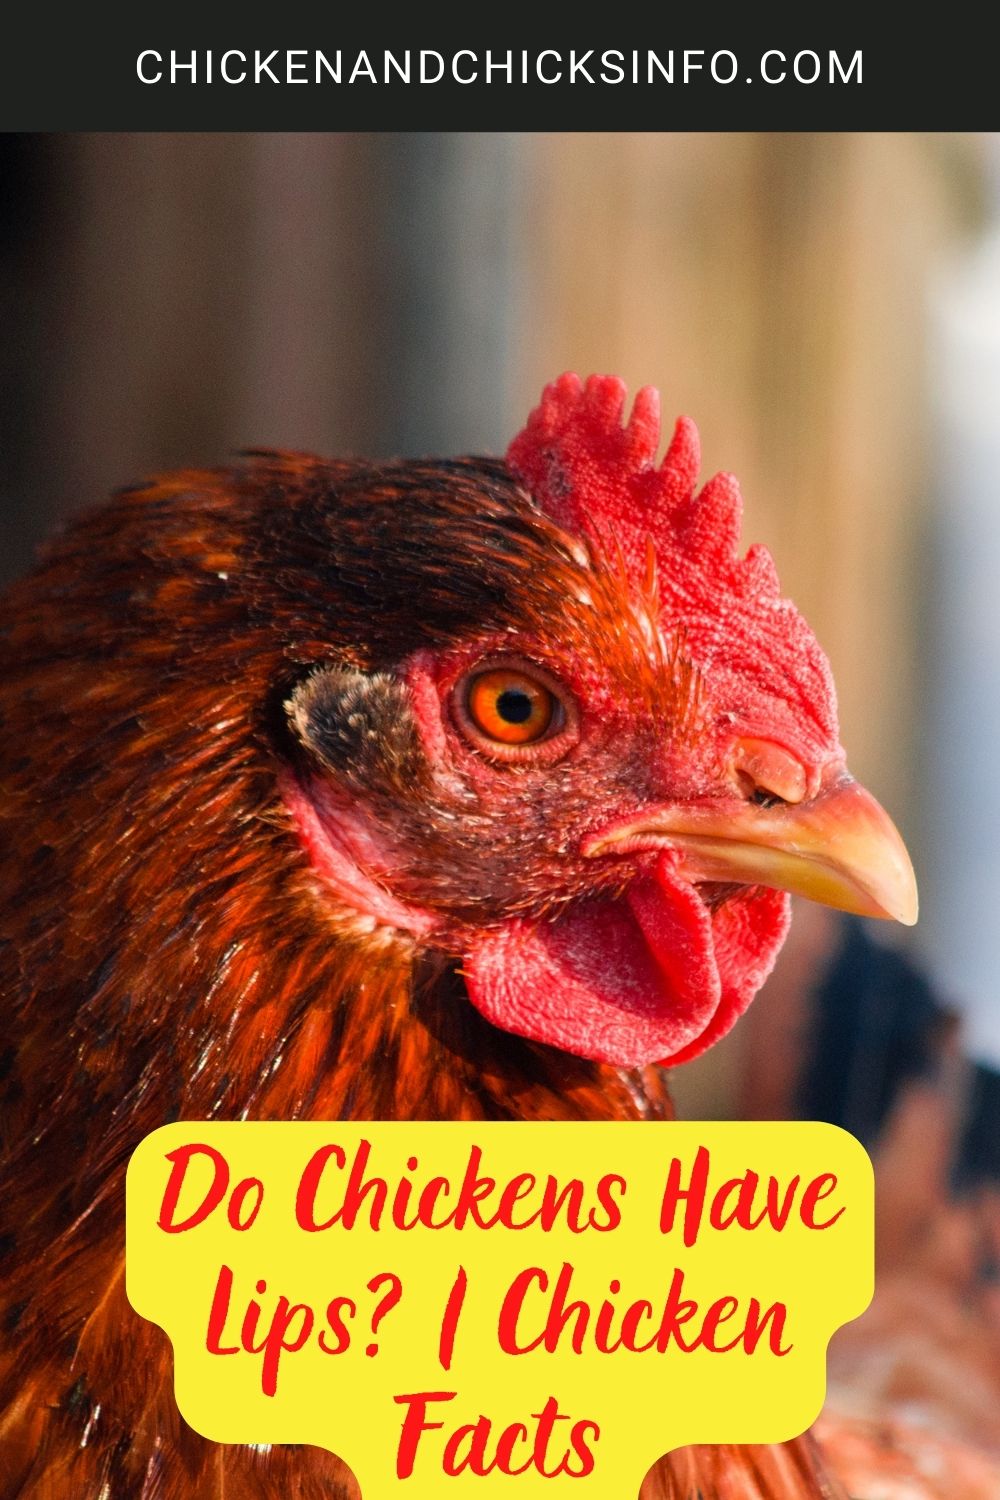 Do Chickens Have Lips? | Chicken Facts poster.
